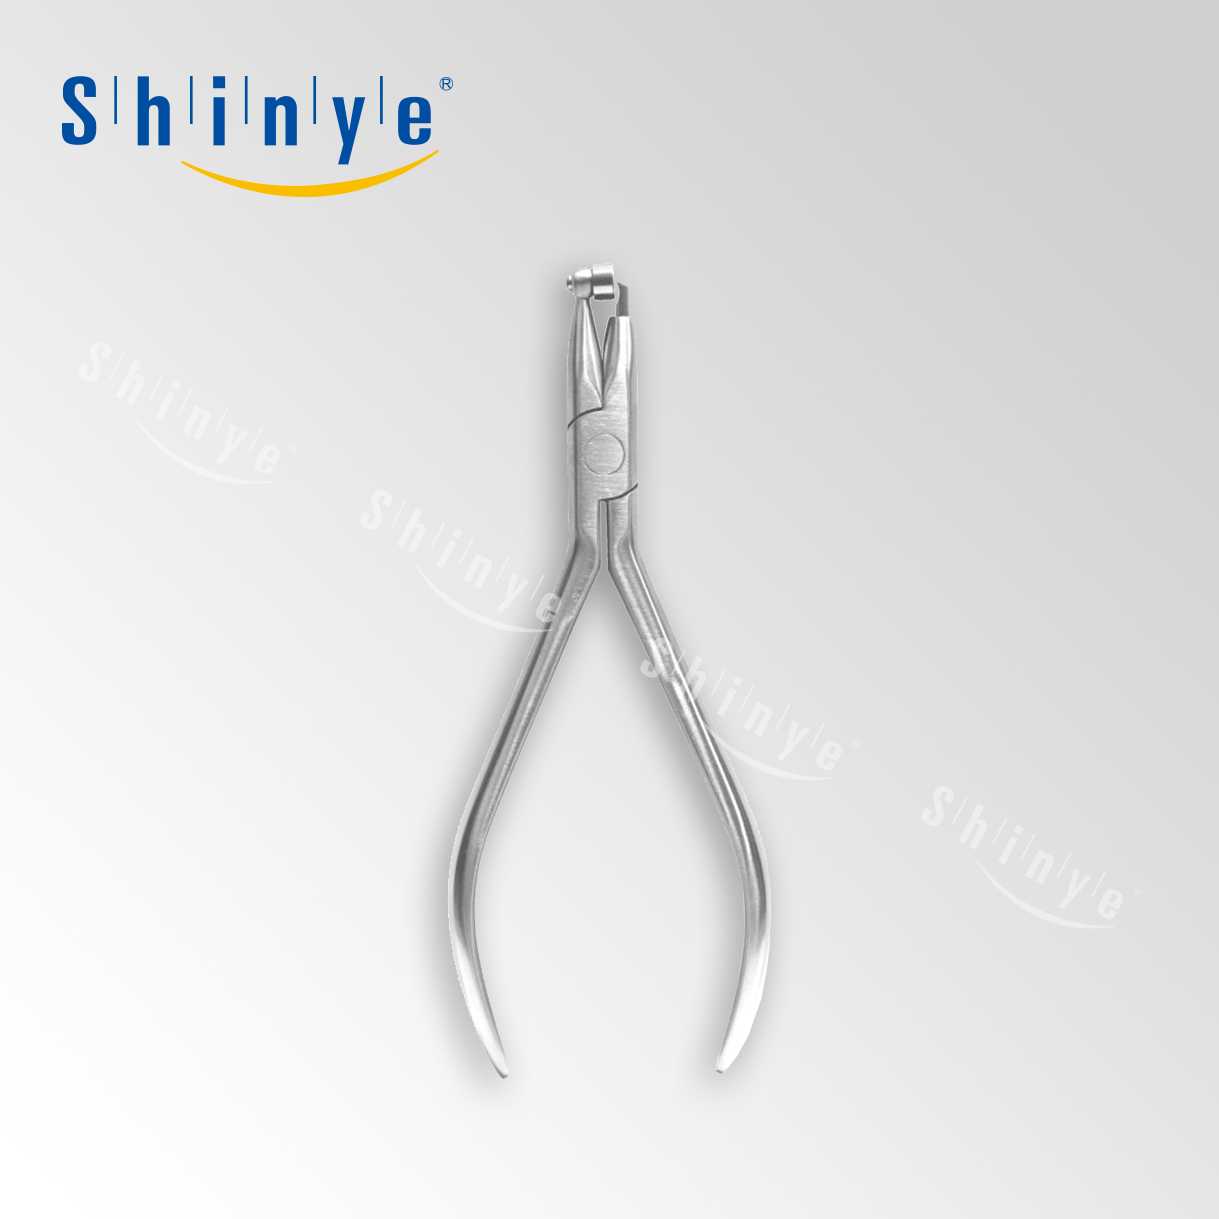 Adhesive Remover Plier